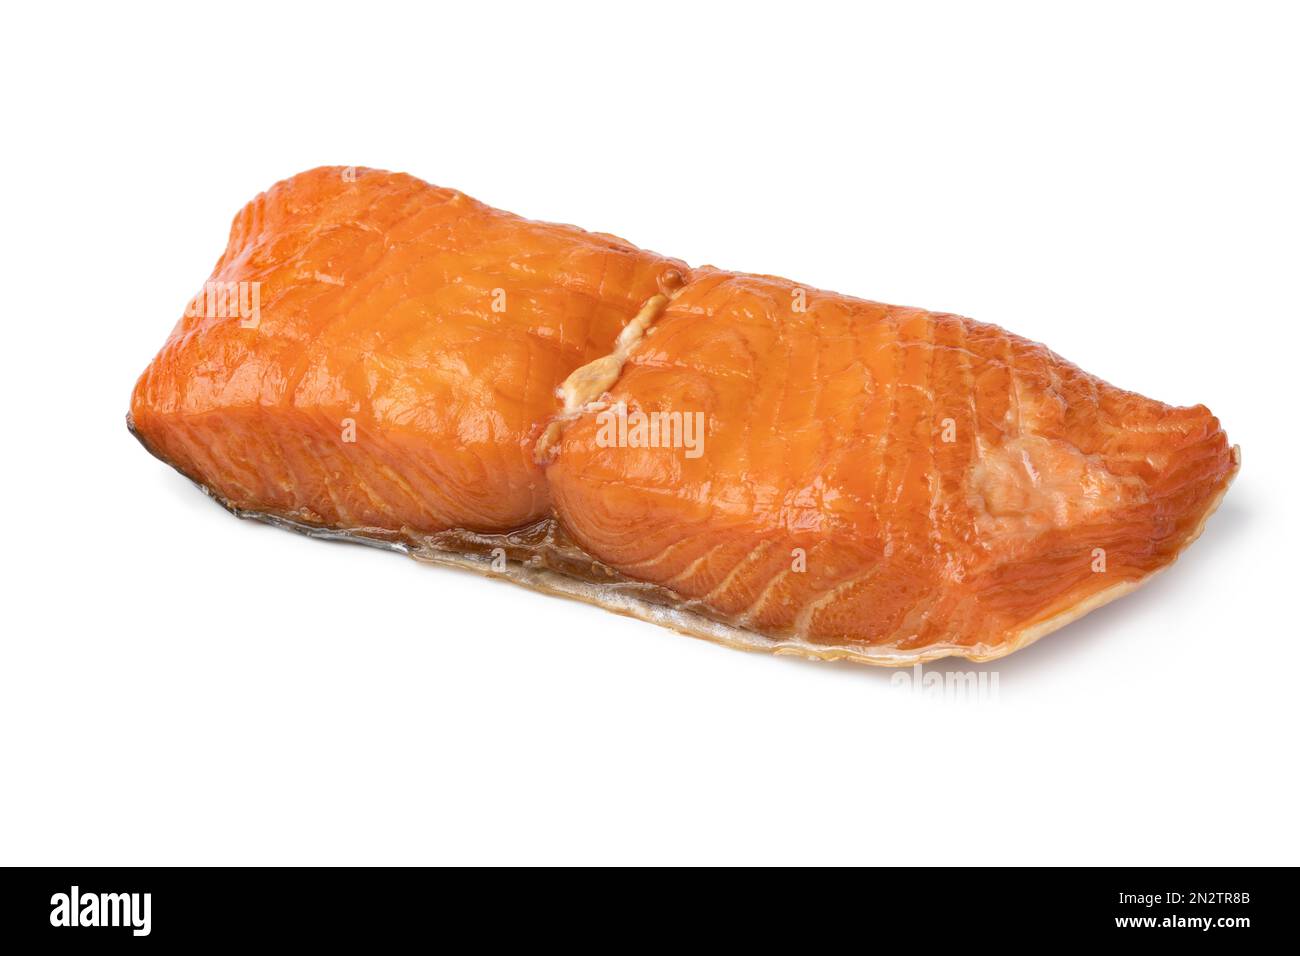 Piece of smoked scandinavian salmon filet close up isolated on white background Stock Photo